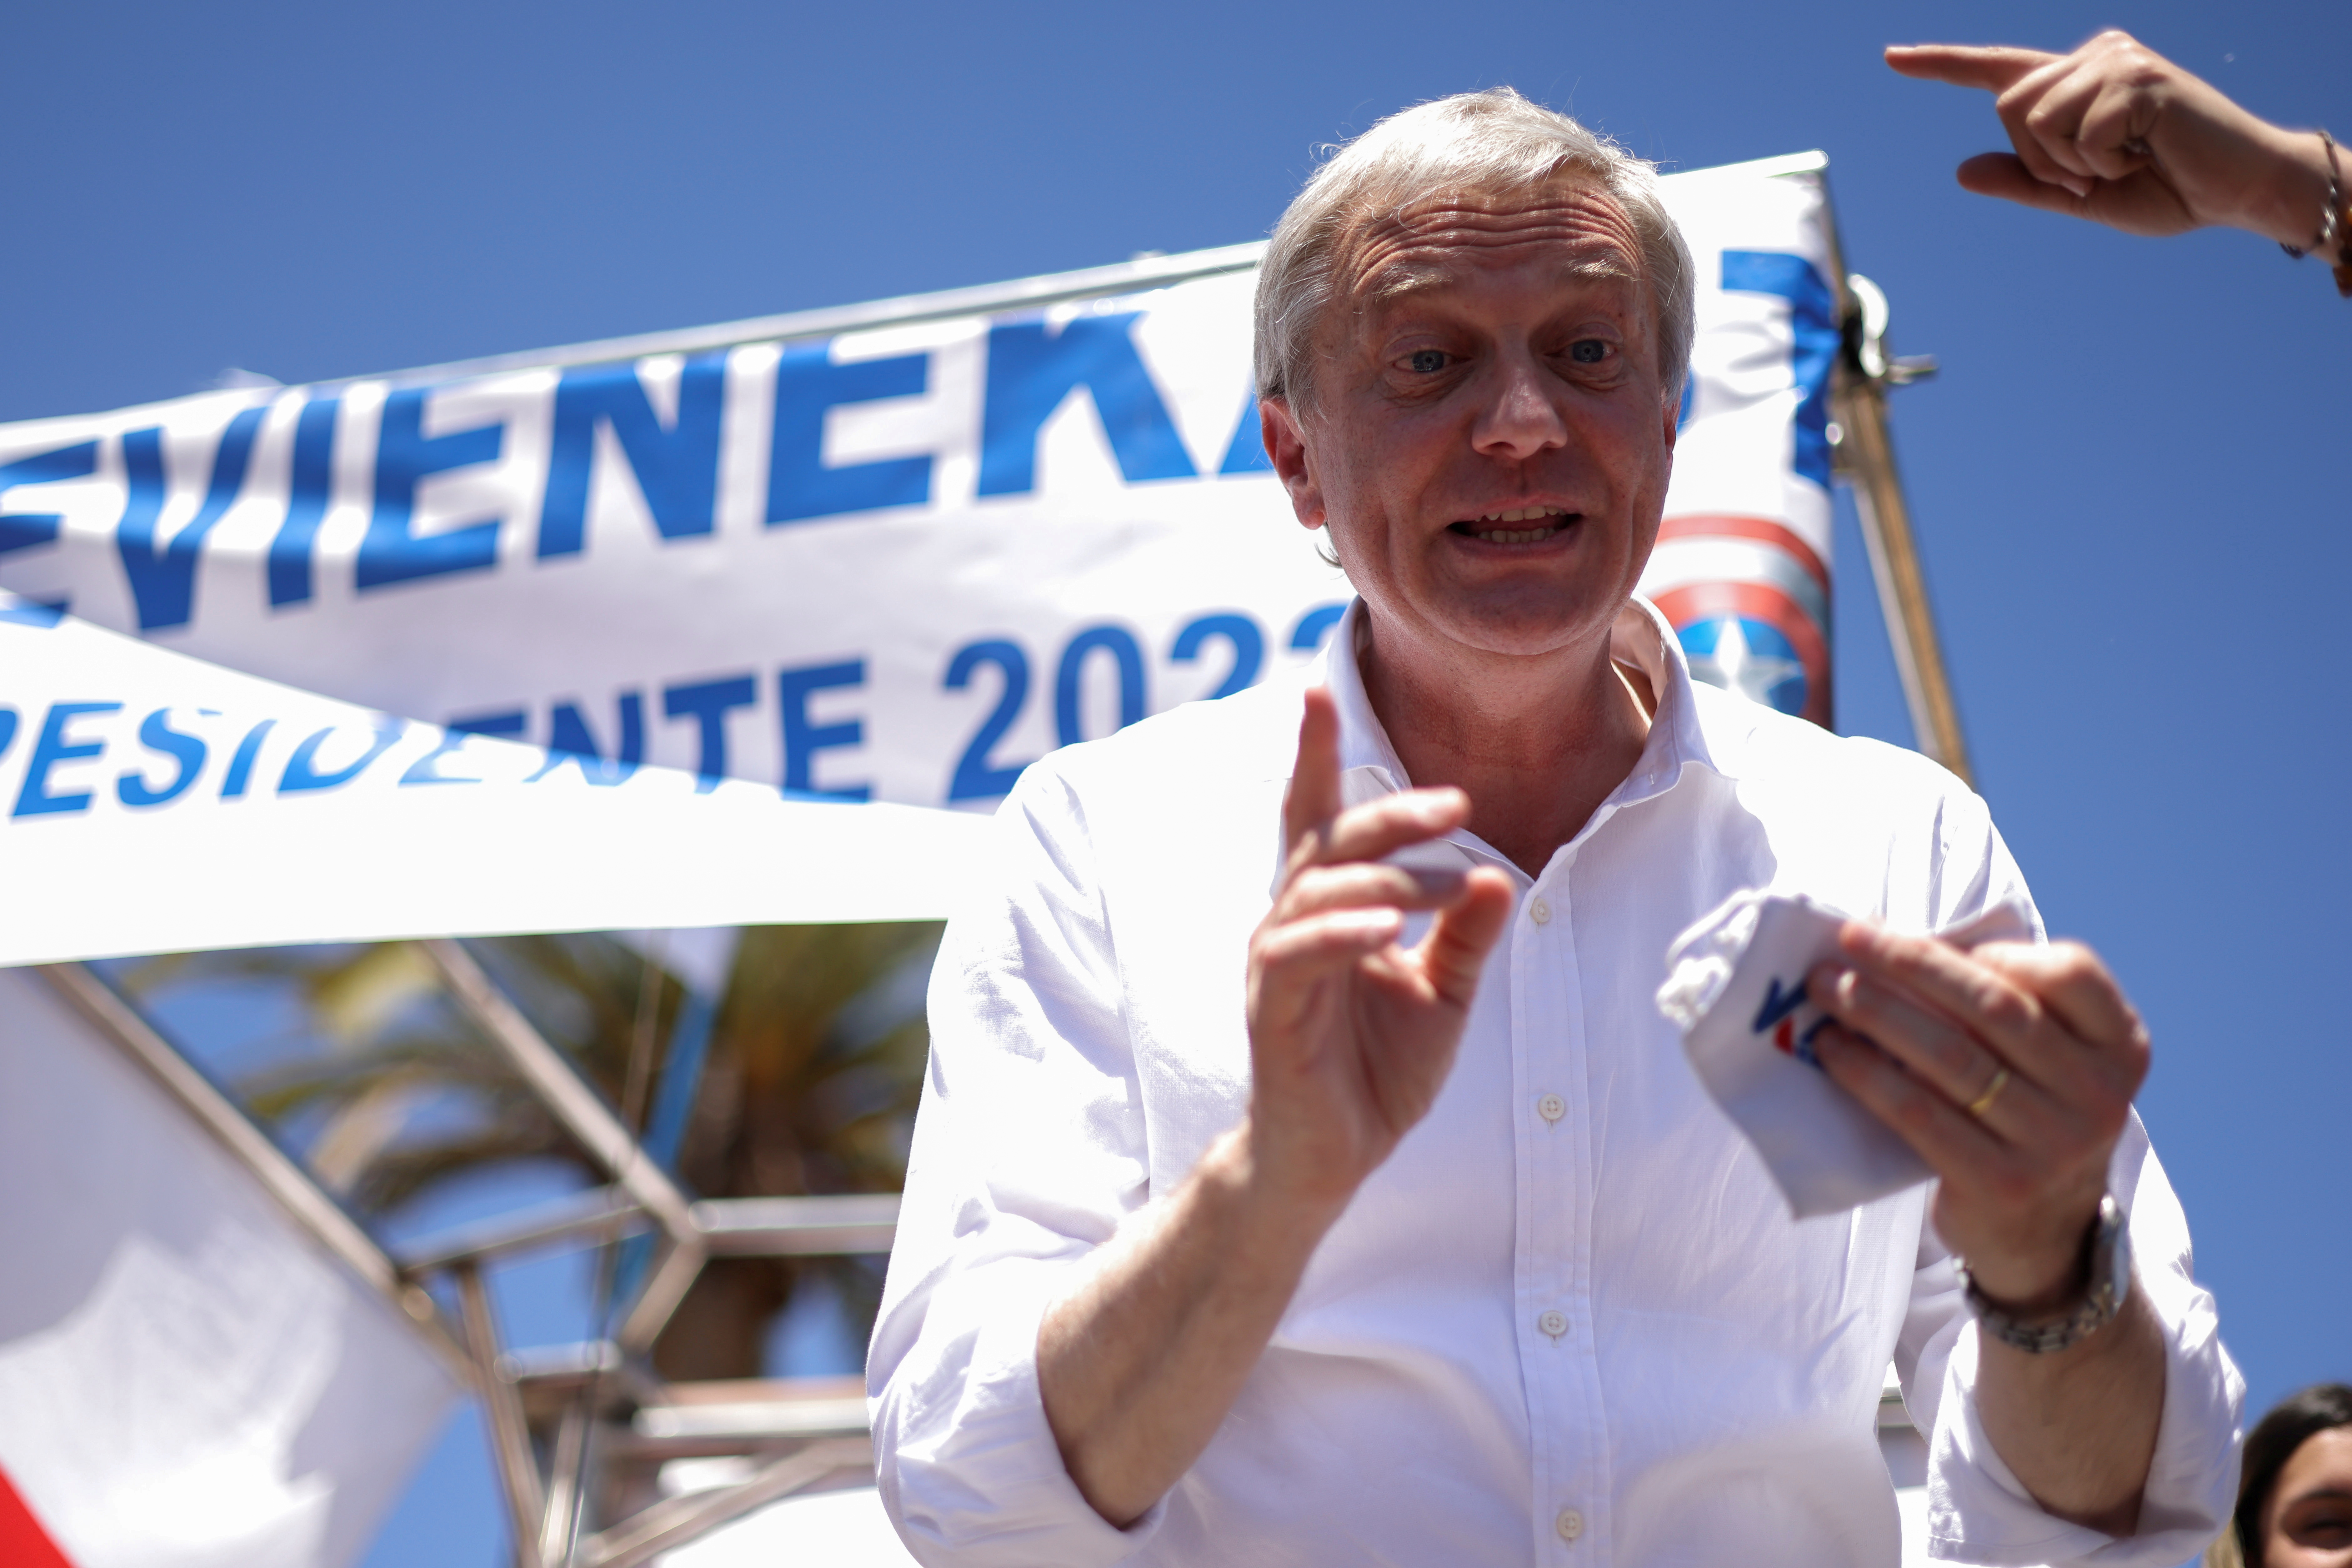 Chilean presidential candidate Jose Antonio Kast meets with supporters in Santiago